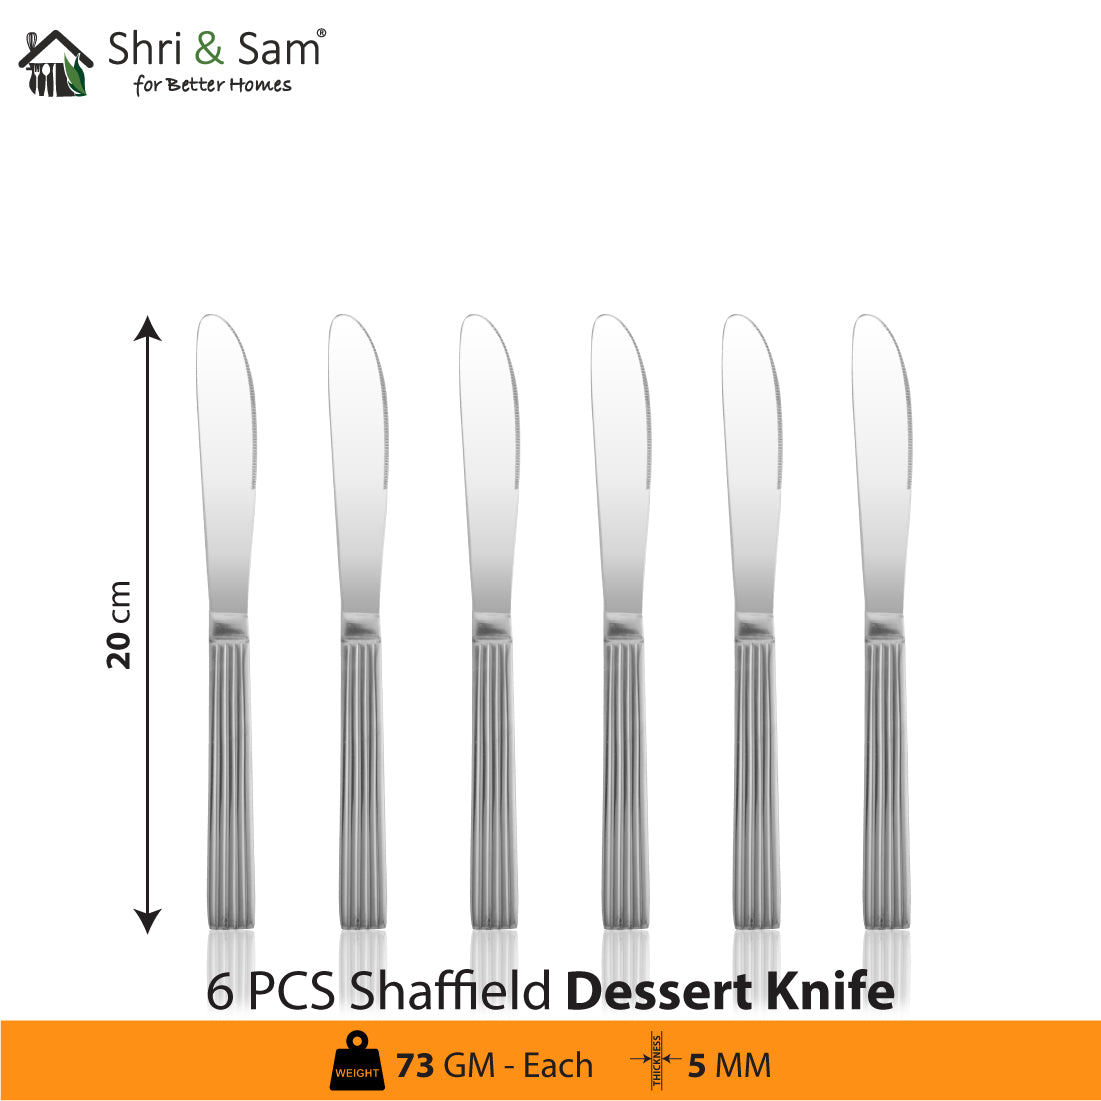 Stainless Steel 24 PCS Cutlery Set Shaffield